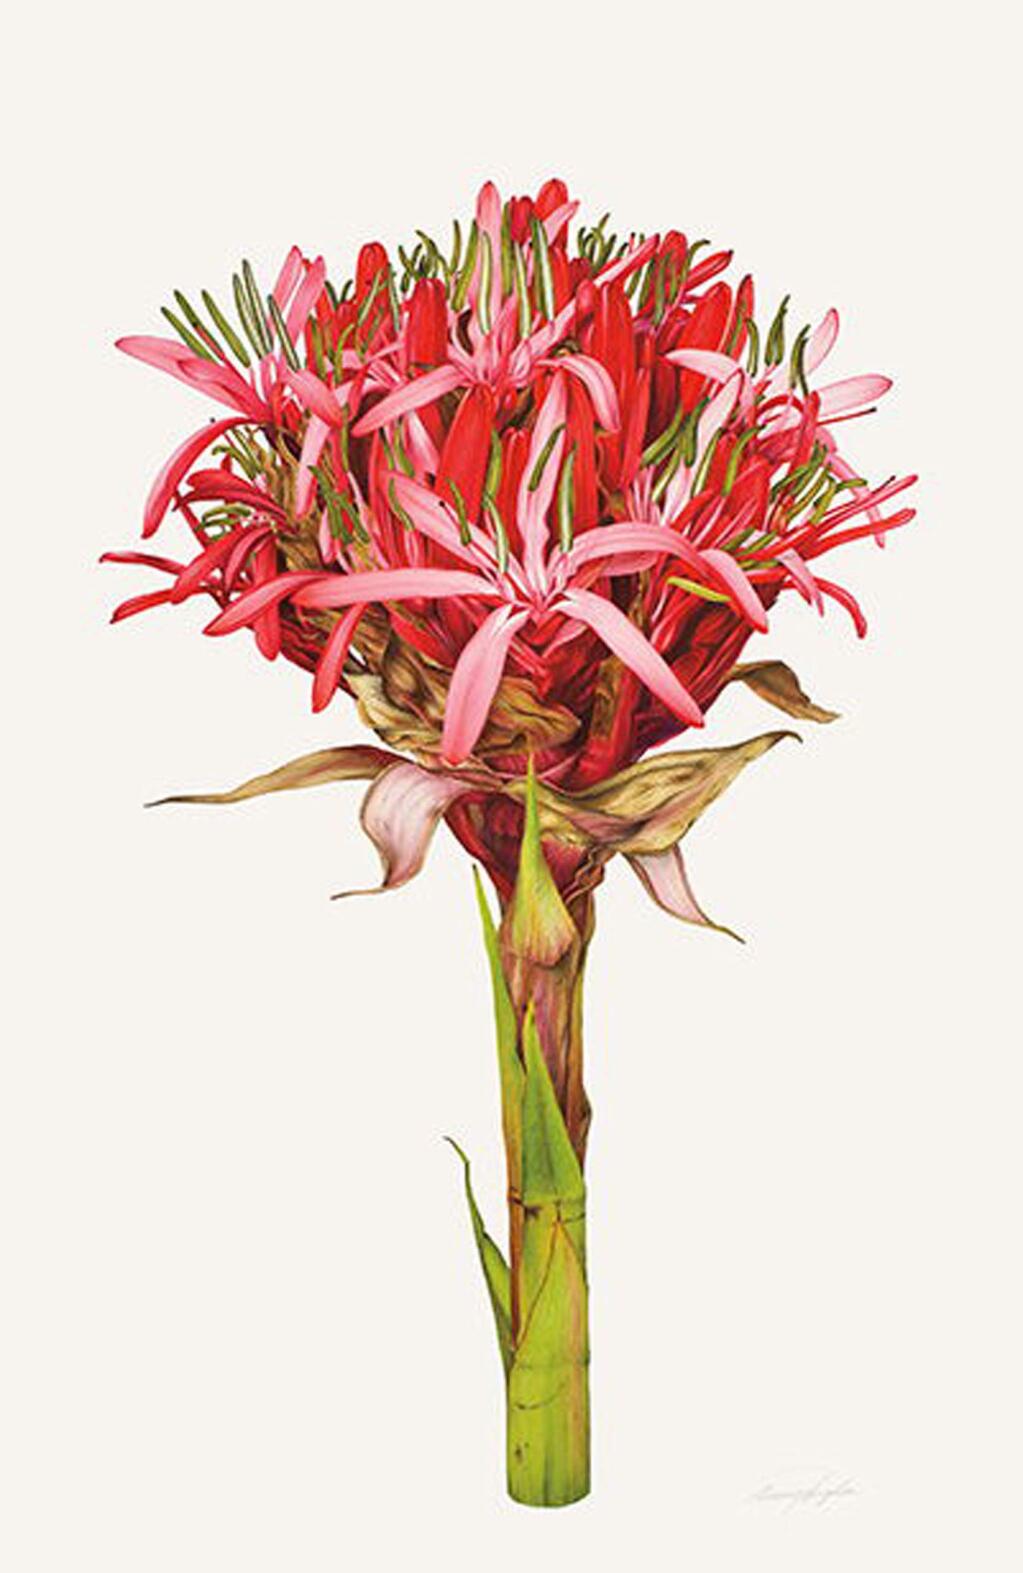 A Doryanthes excelsa, by Annie Hughes, part of the exhibit 'Floribunda'” opening Oct. 16 and on display through Dec. 11, is a traveling exhibit of works from the collection of the Hunt Institute for Botanical Documentation at Canegie Mellon University in Pittsburgh, Pa., at the Petaluma Arts Center. (PETALUMA ARTS CENTER)